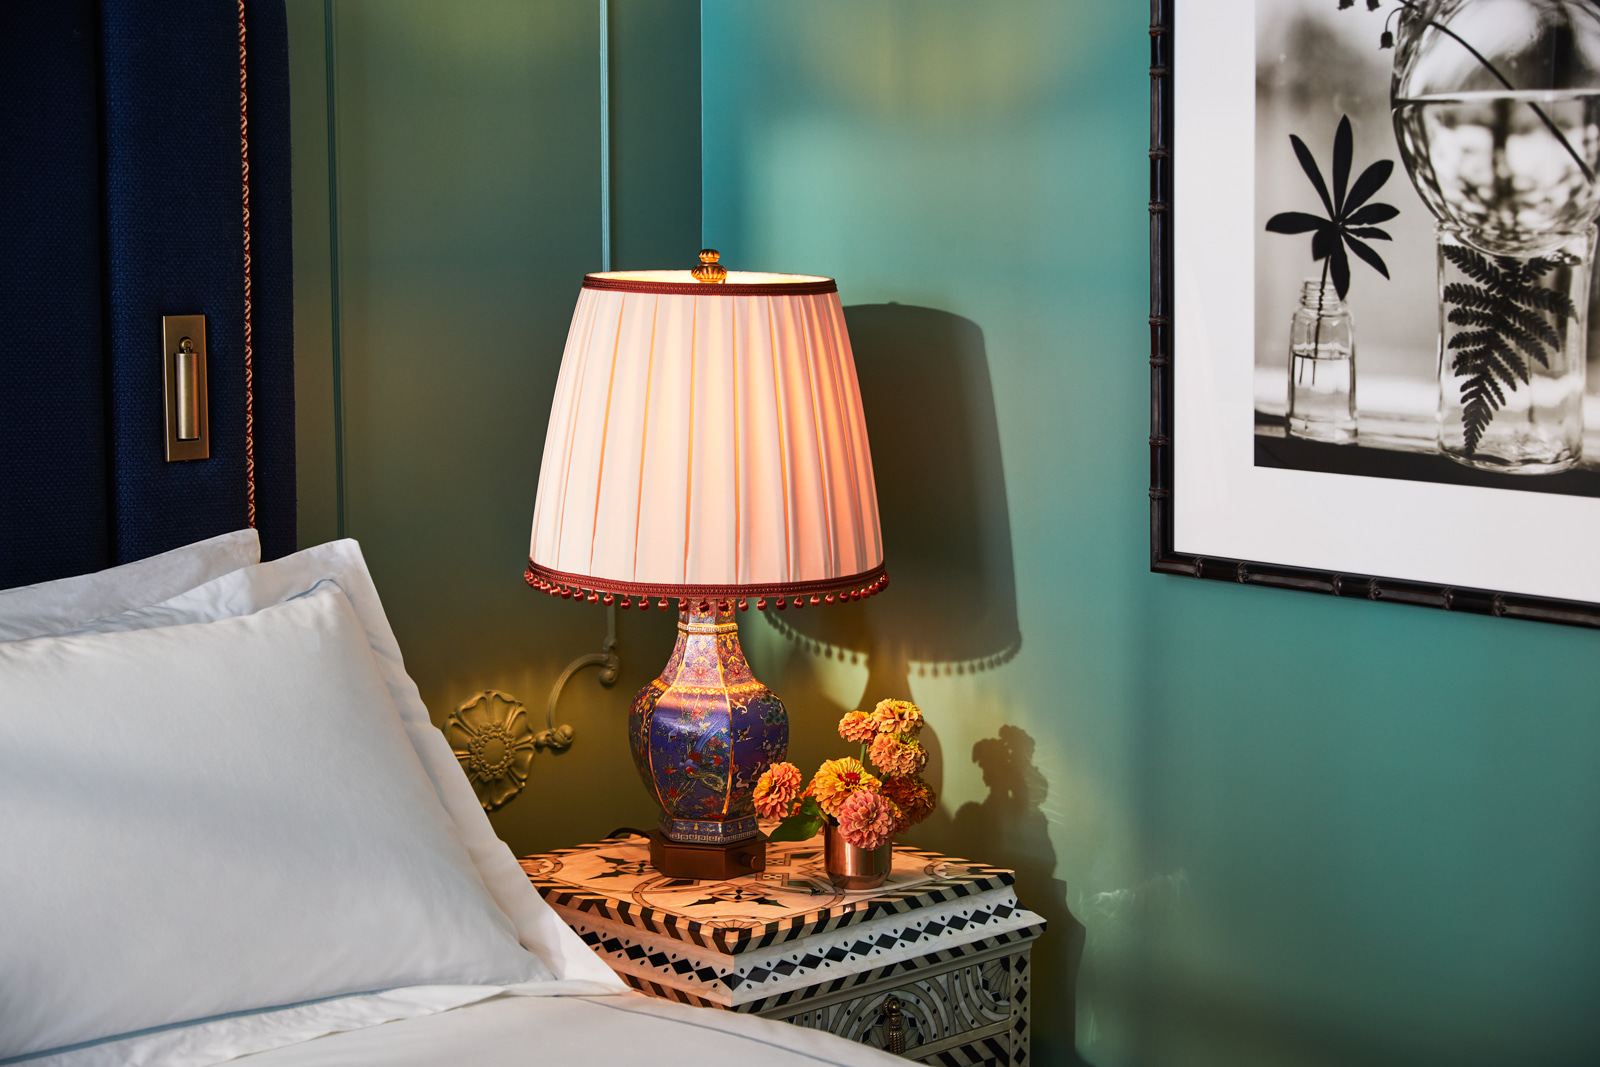 Night lamp and petite vase on bedside table, a portrait hanging on the right wall.